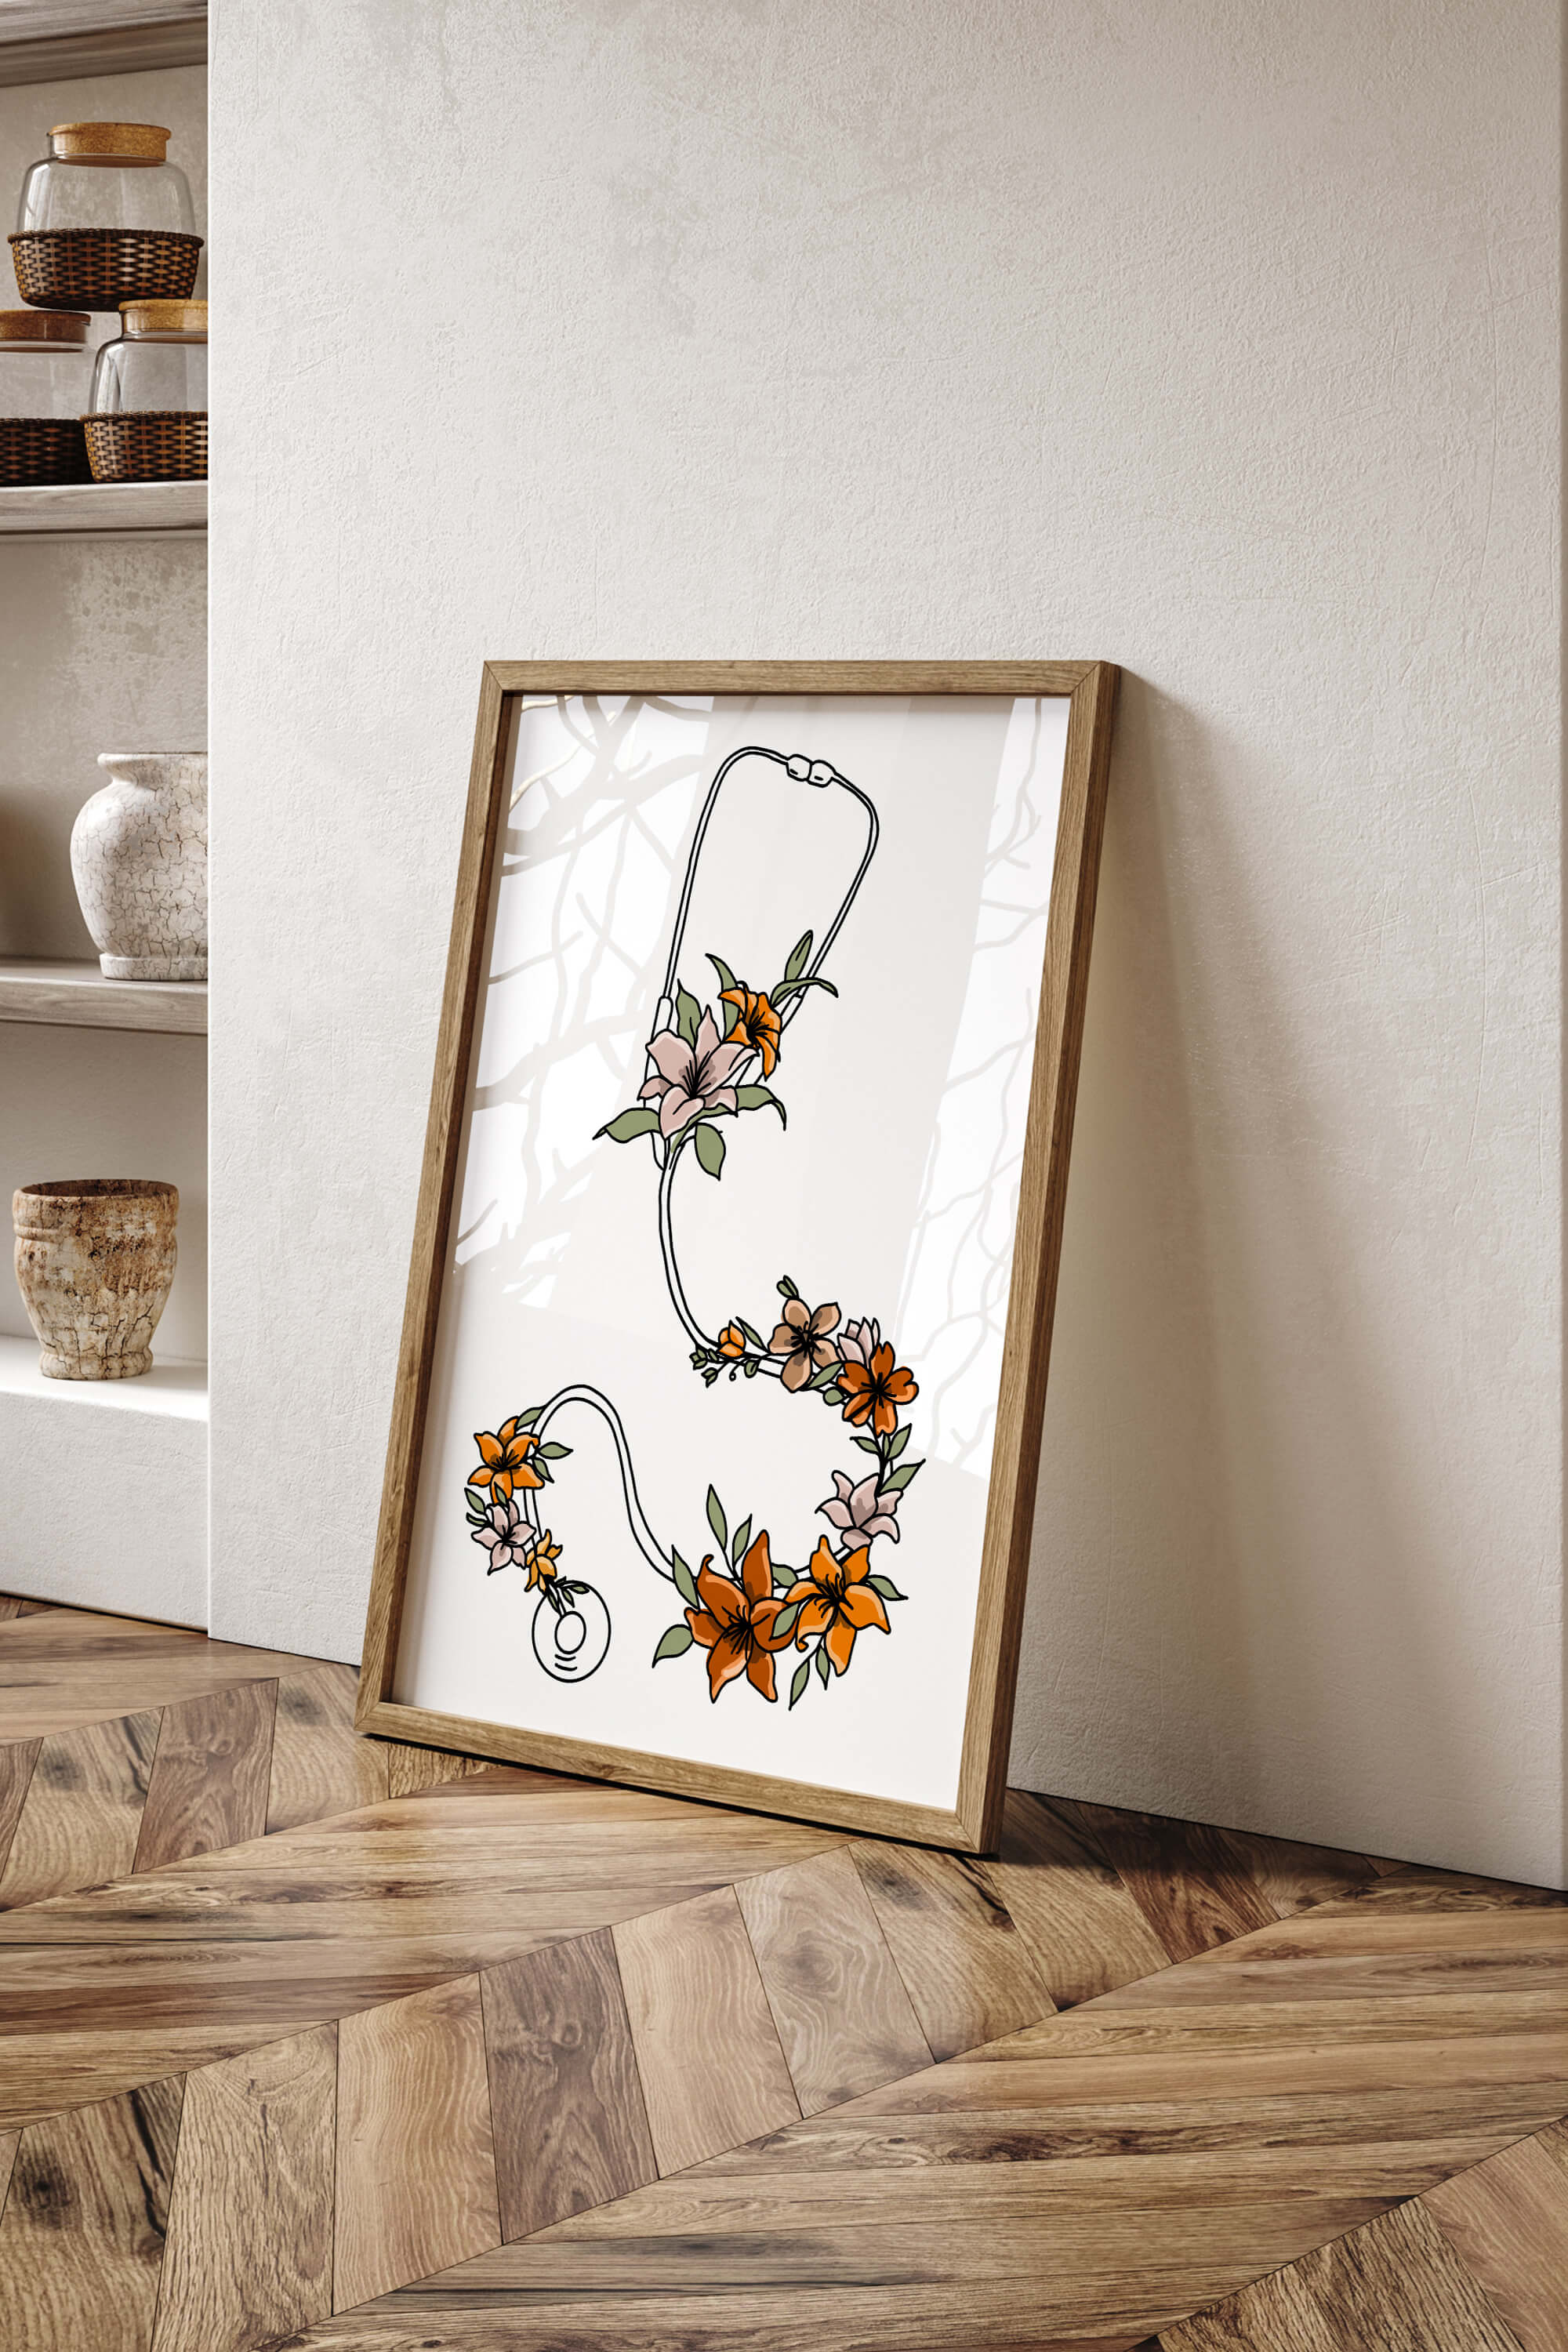 Colorful stethoscope wall art against a white background, blending medical themes with botanical aesthetics.